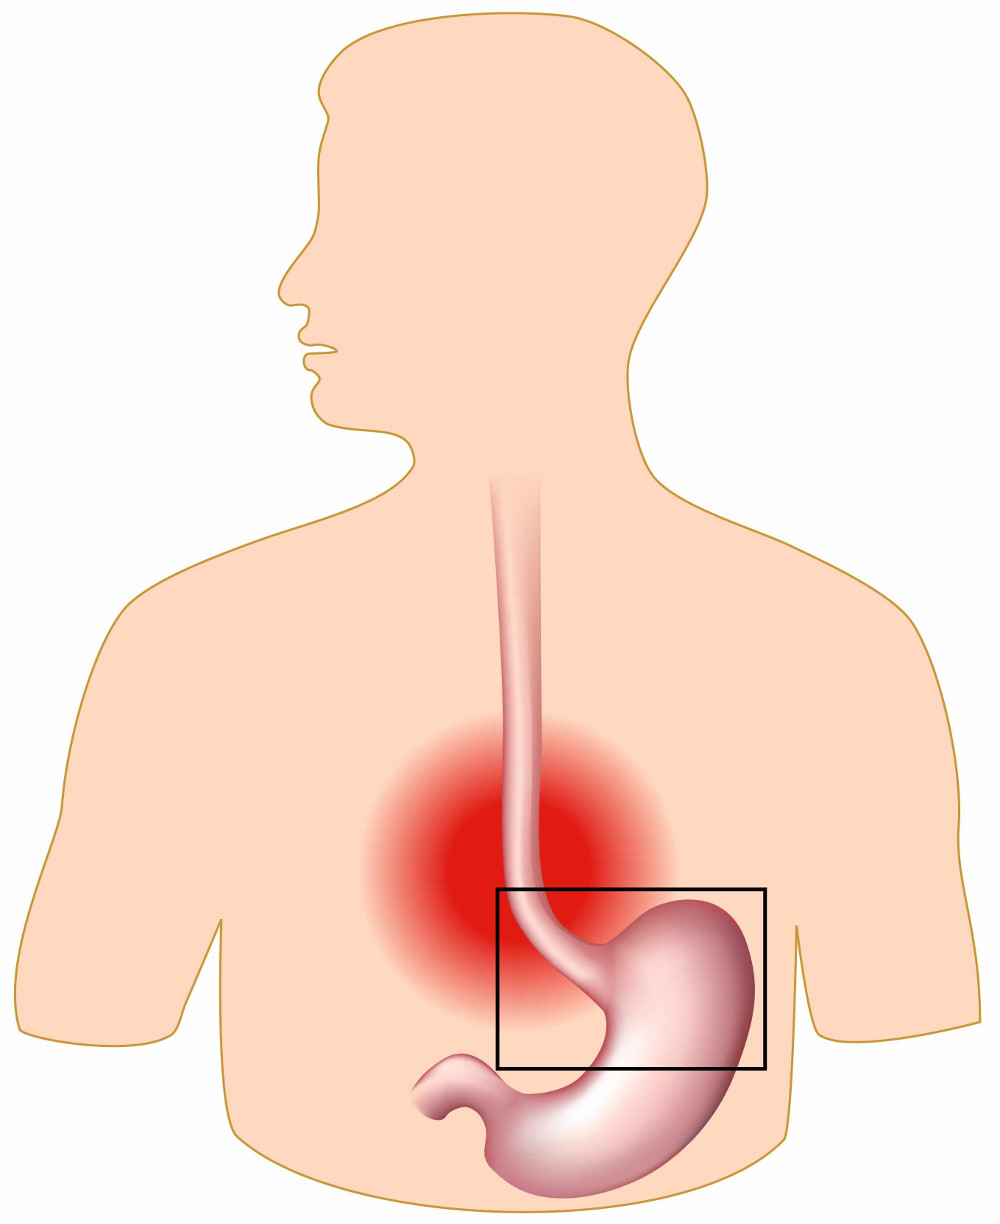 Indigestion: excess or deficiency of stomach acid?